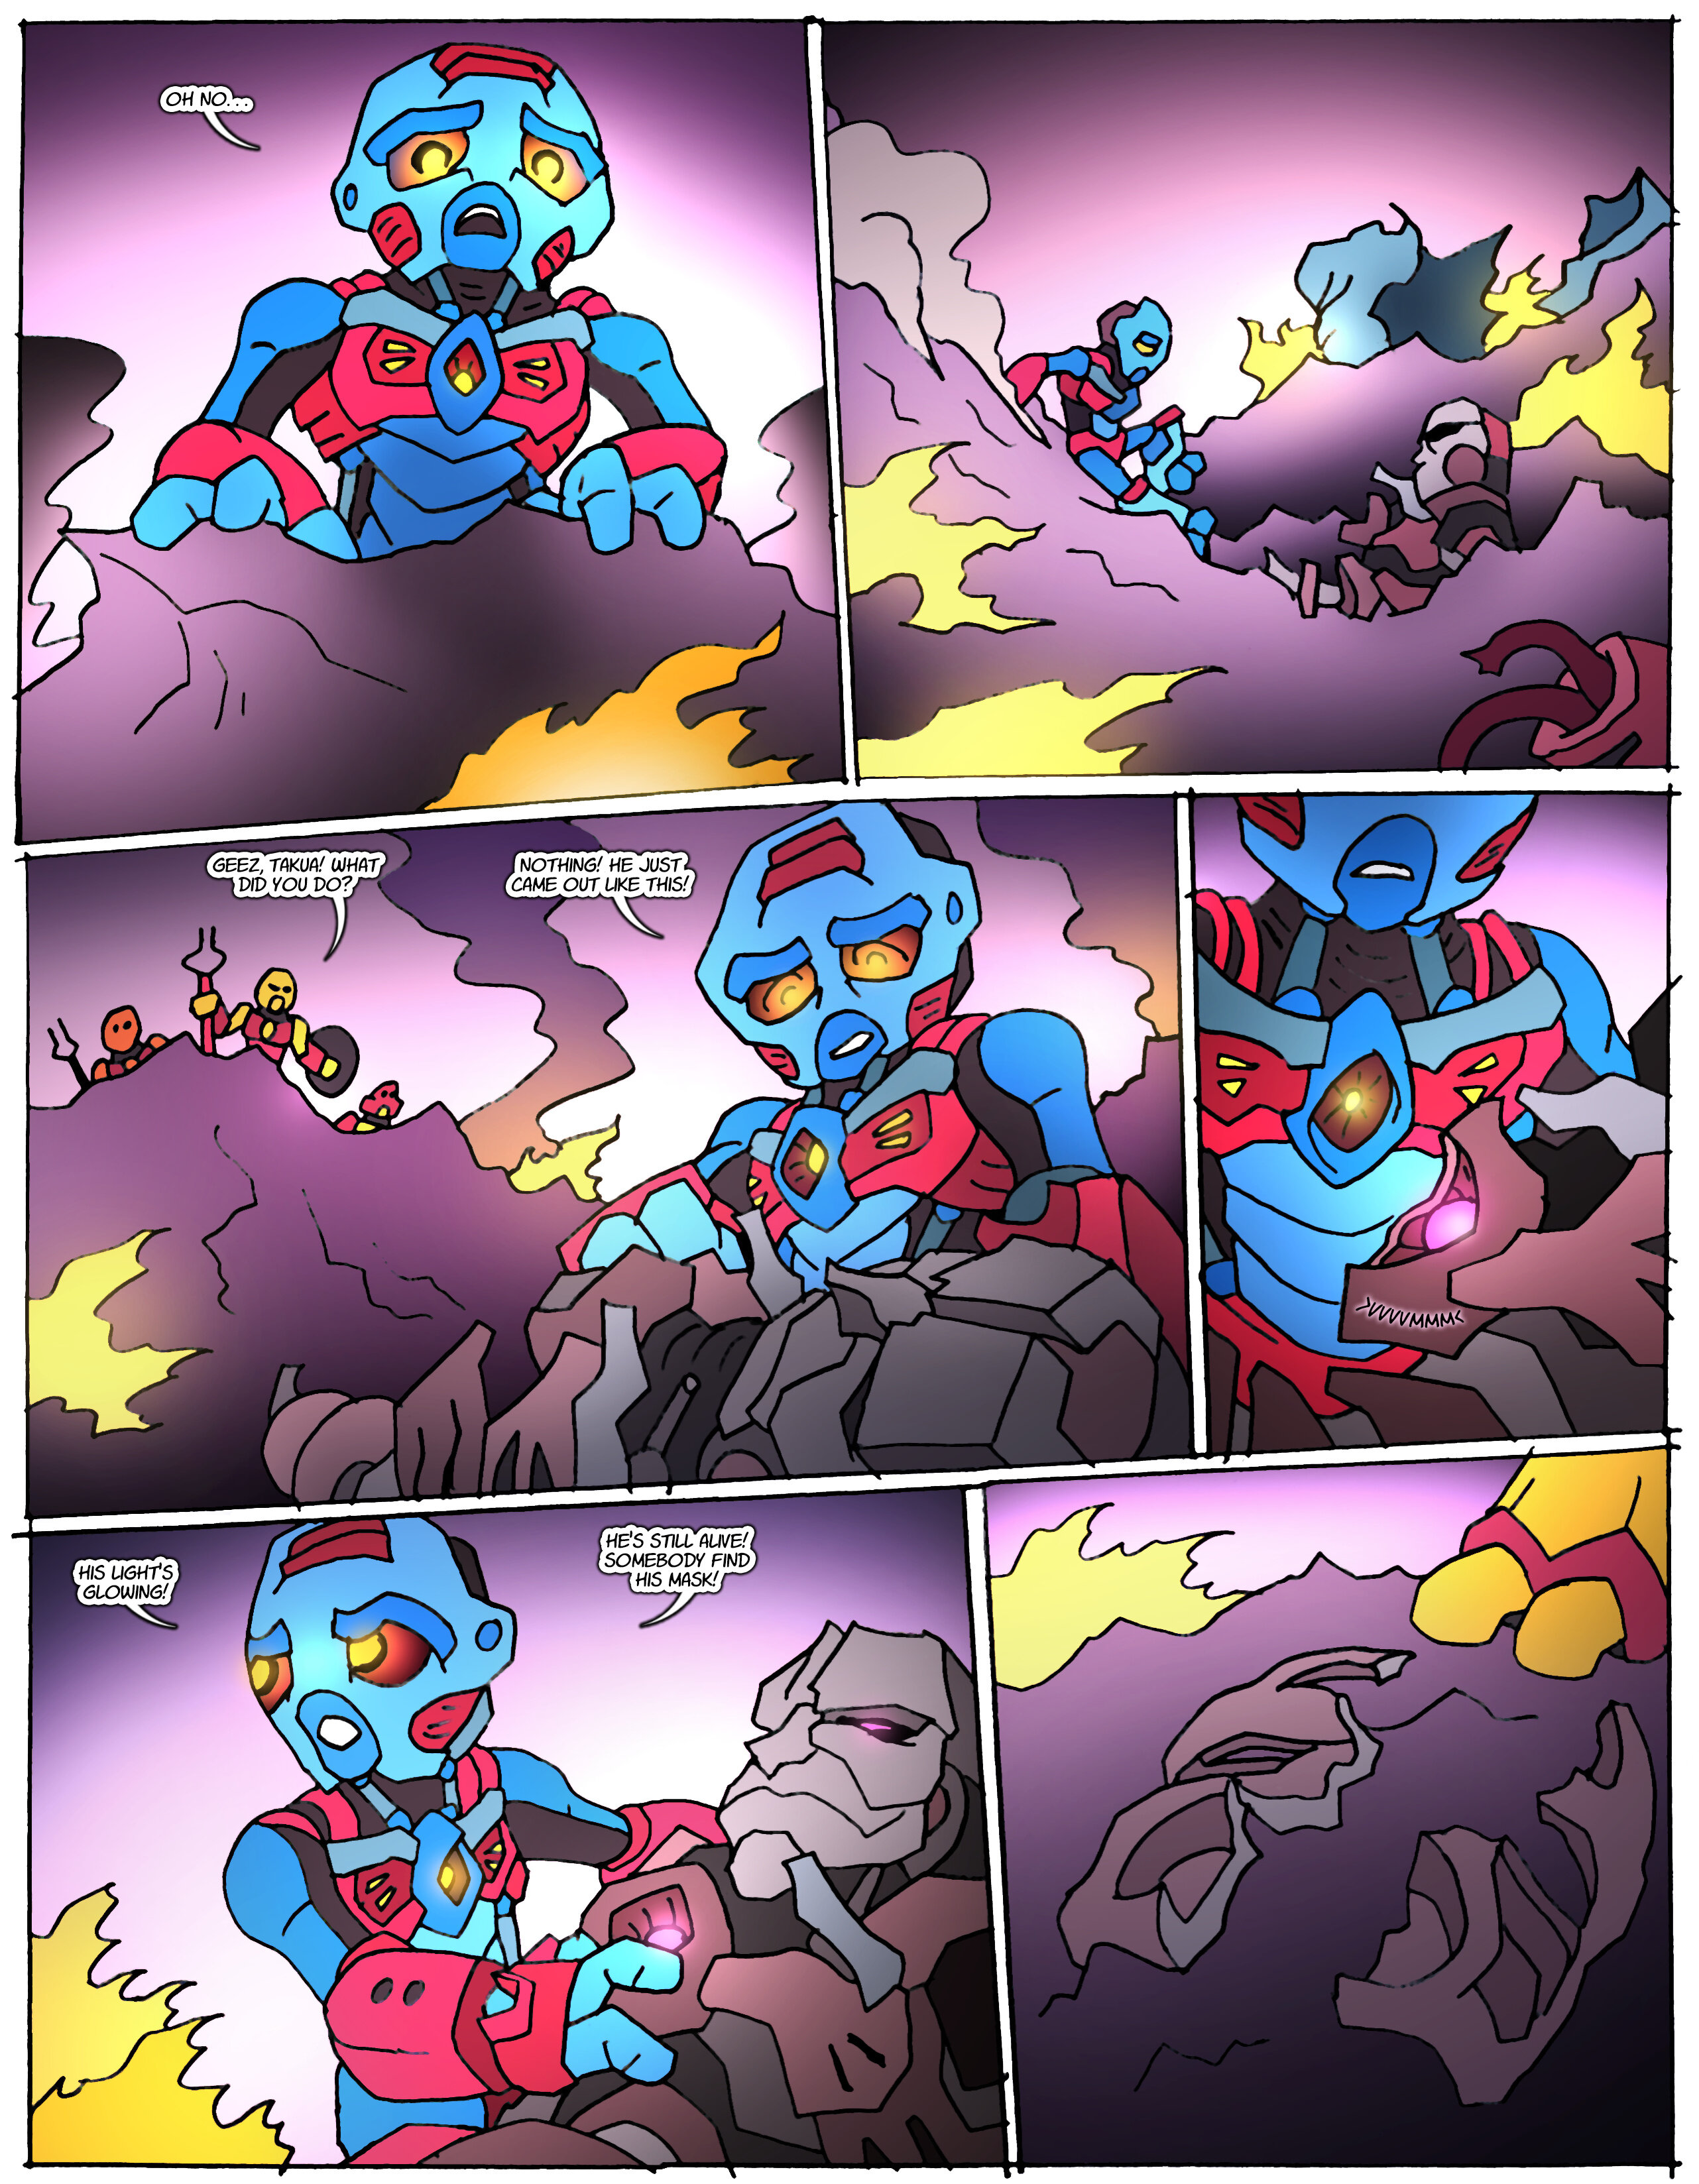 The Toa- A Bionicle Retelling by NickonAquaMagna 